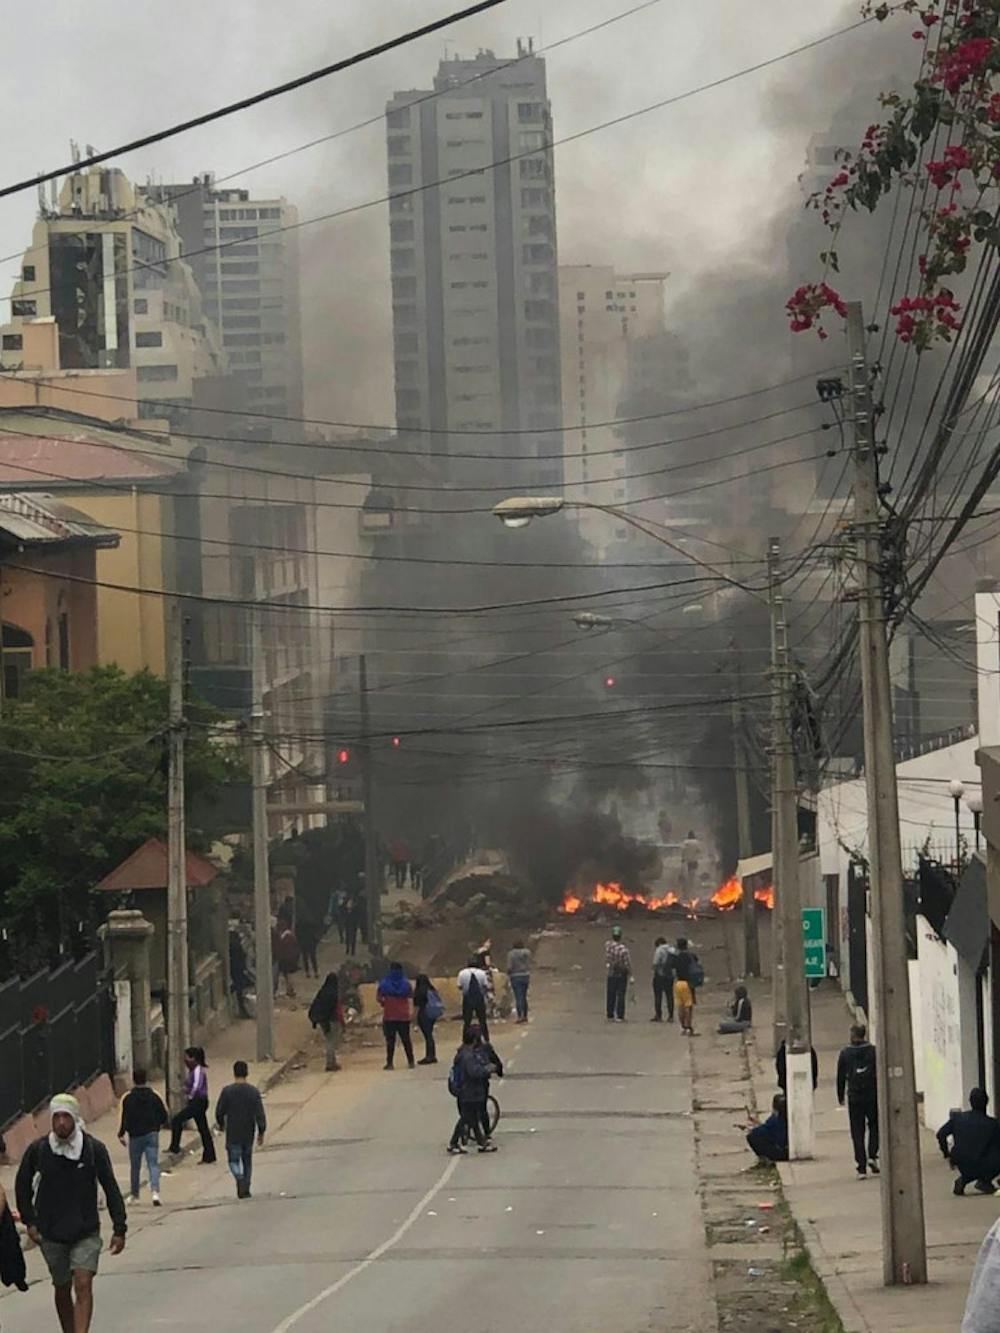 <span class="photocreditinline">SIDRA PIERSON/COURTESY PHOTO</span><br />Sidra Pierson ’21, who chose to remain in Chile for the remainder of the semester, said she watched smoke rise above the city as fires set by arsonists raged.